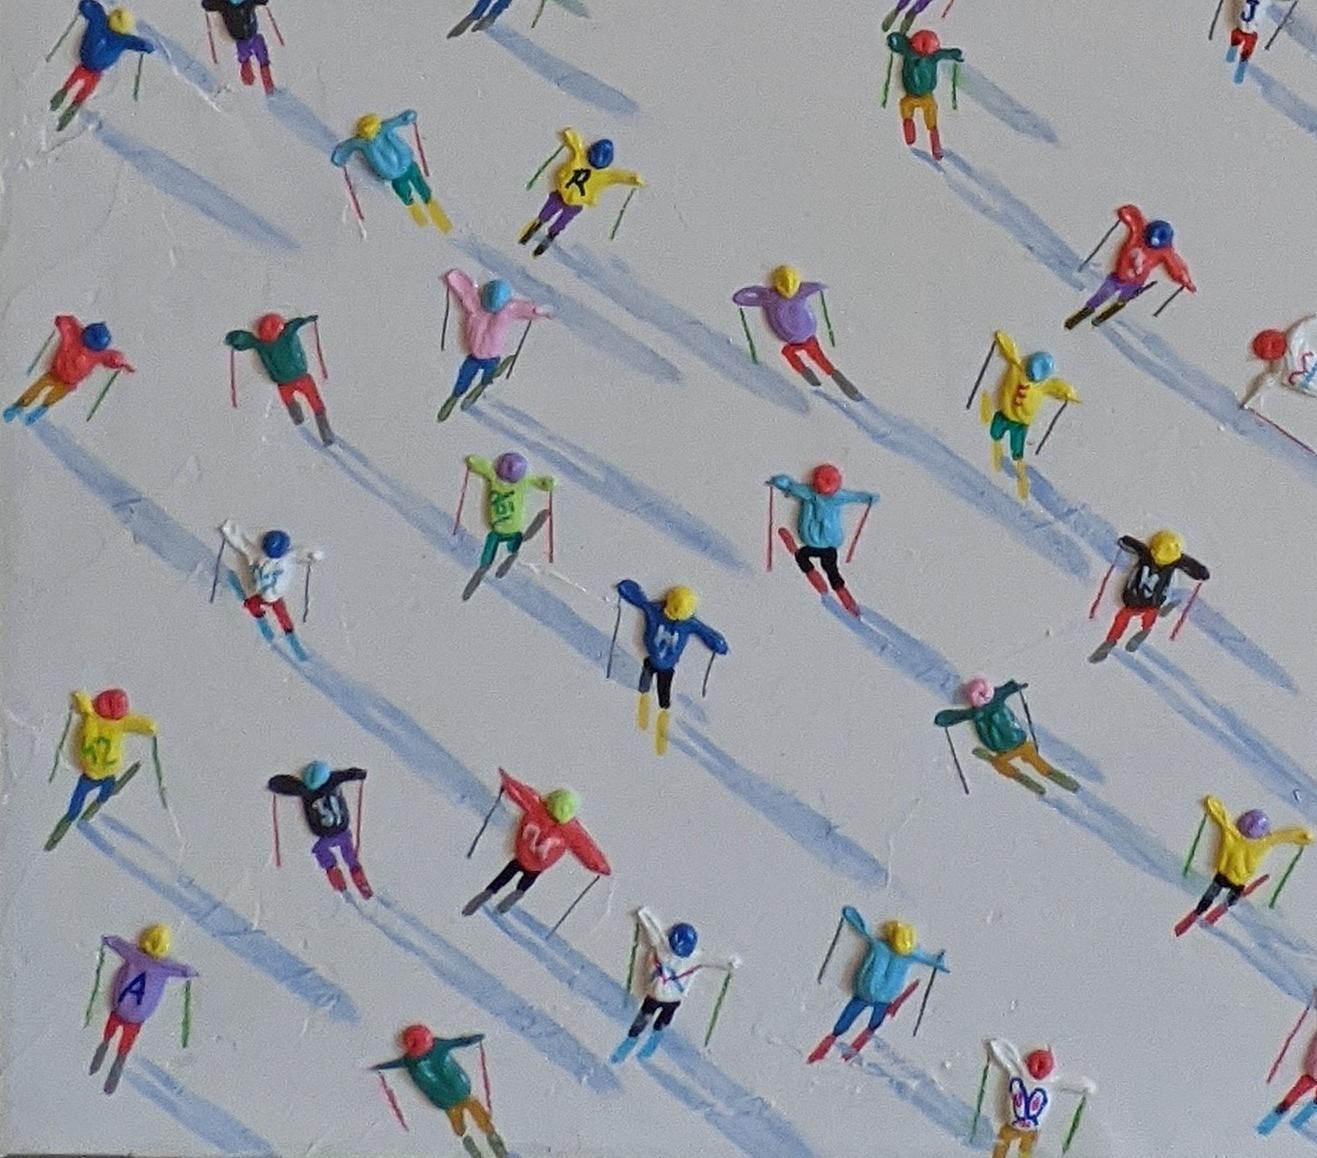 'Freestyle Skiing' Contemporary 3D Figurative & Alpine Landscape Painting - Gray Figurative Painting by Max Todd